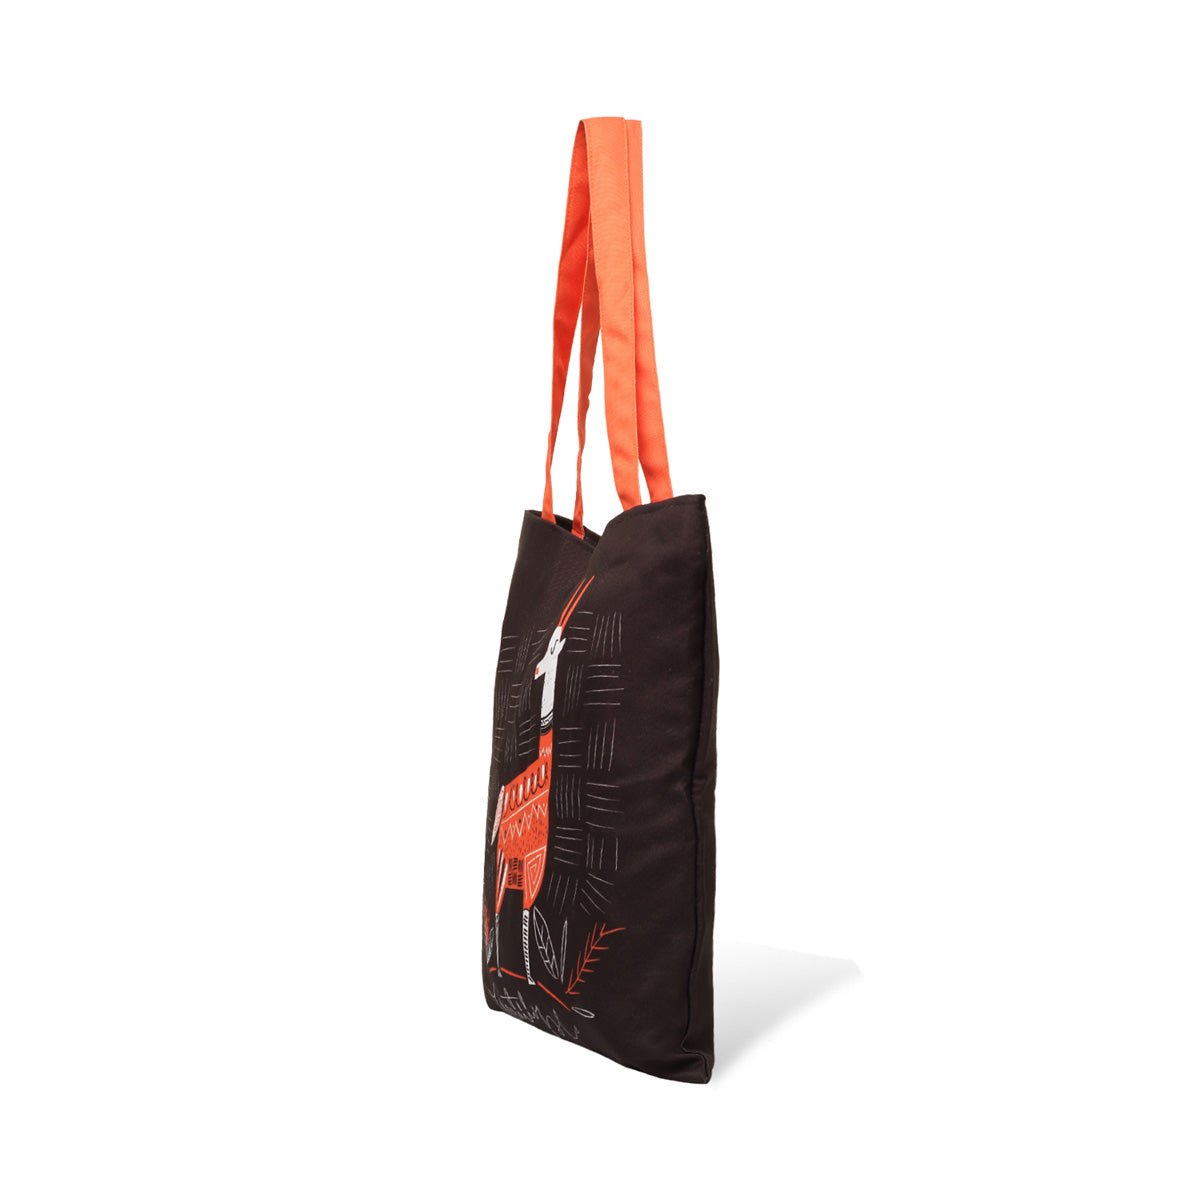 side view of  Black tote bag with an orange strap and a printed design of a white llama with orange and black geometric patterns.